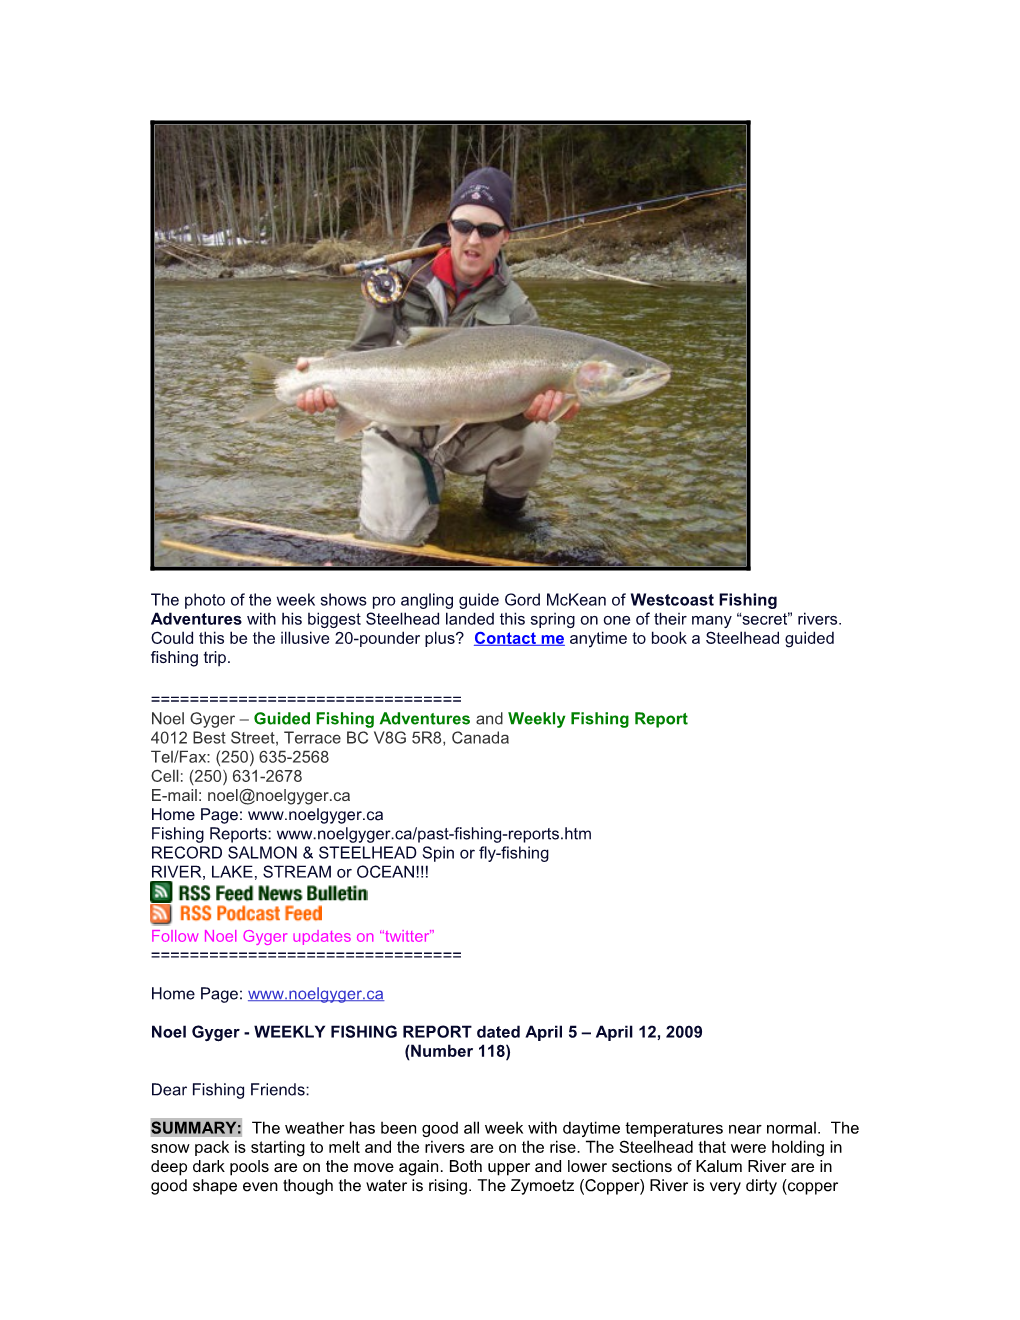 Noel Gyger Guided Fishing Adventures and Weekly Fishing Report s1